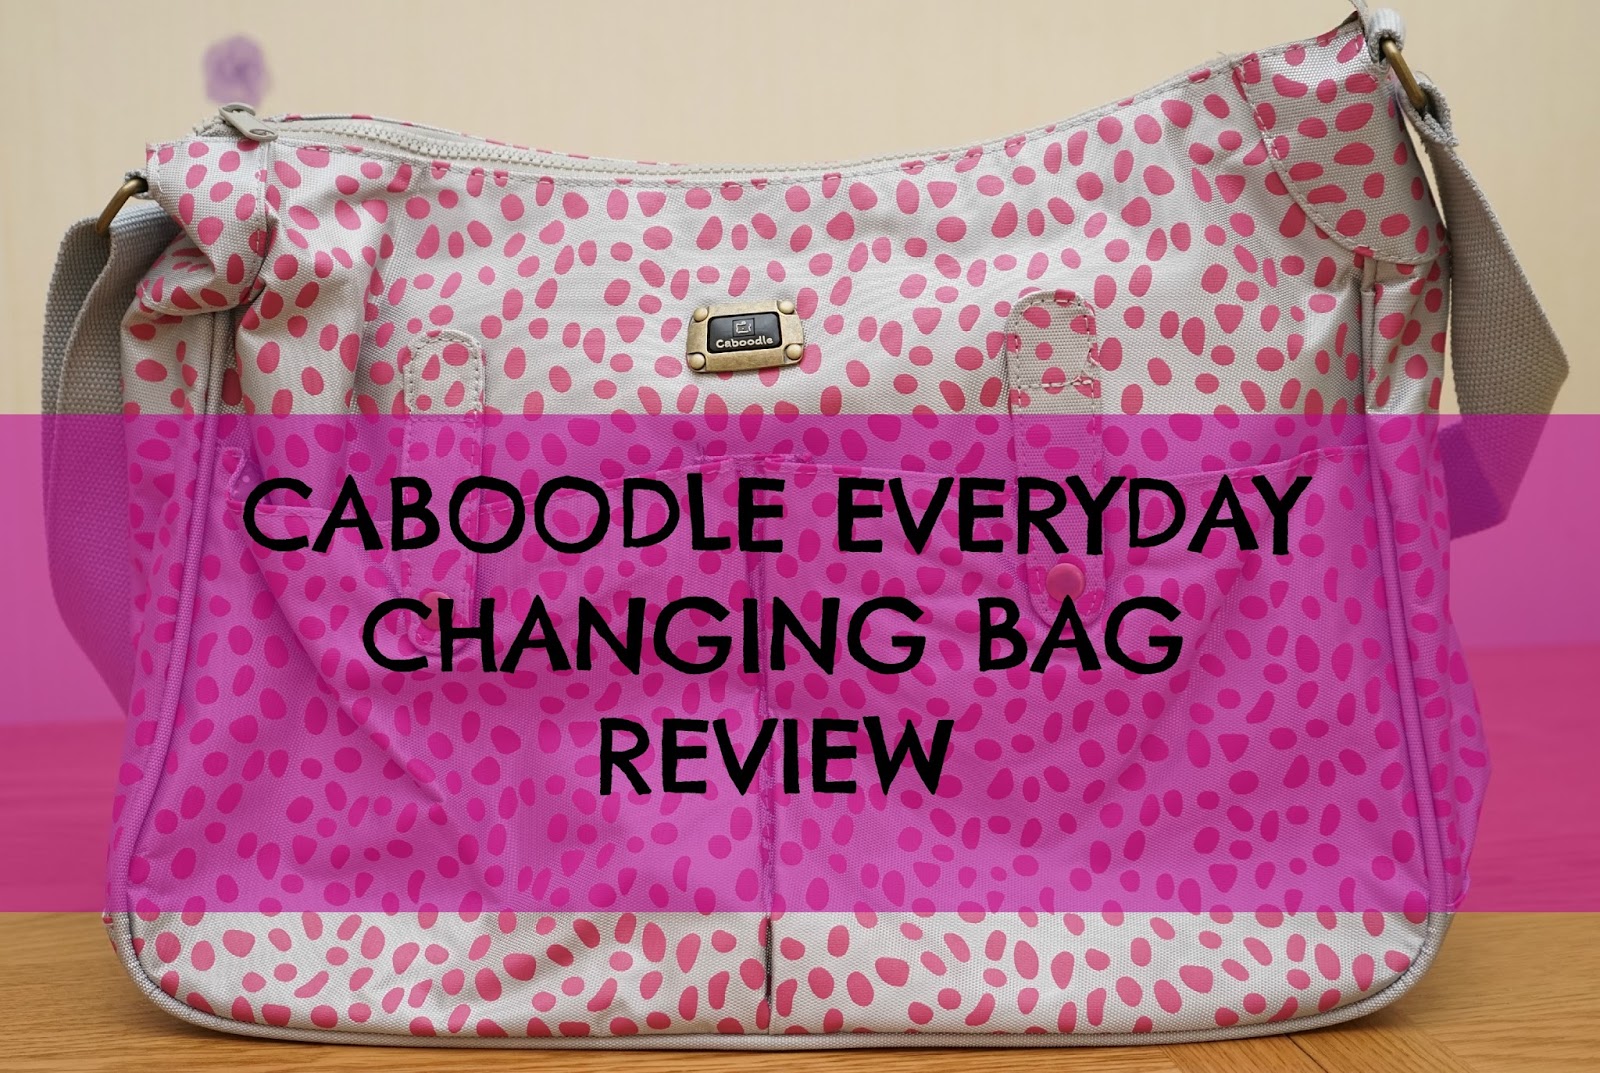 Caboodle Baby Changing Bag Classic Tote Fun & Funky | eBay